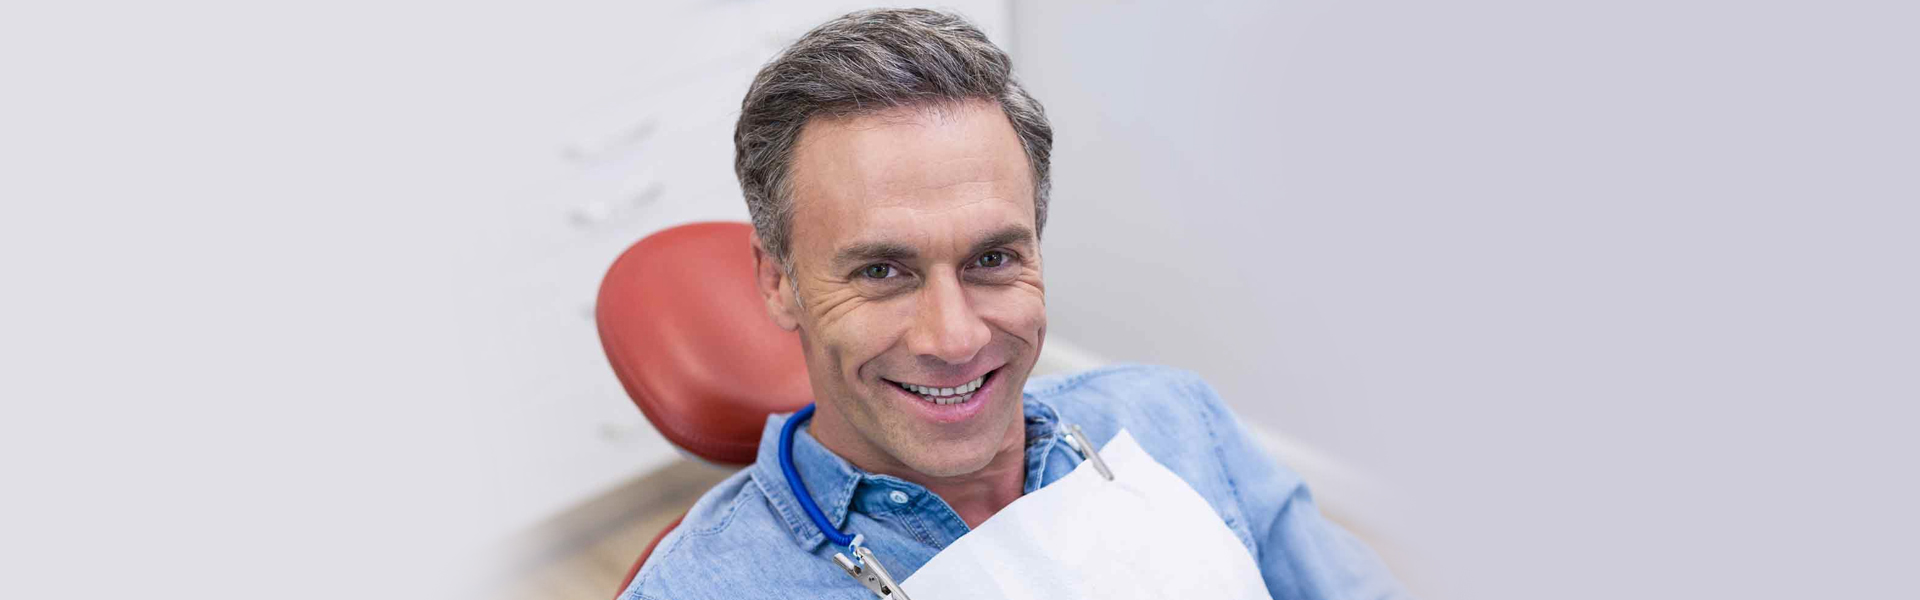 A Close-Up Look Into Dental Implants: The Cost, Types, Problems, and Safety